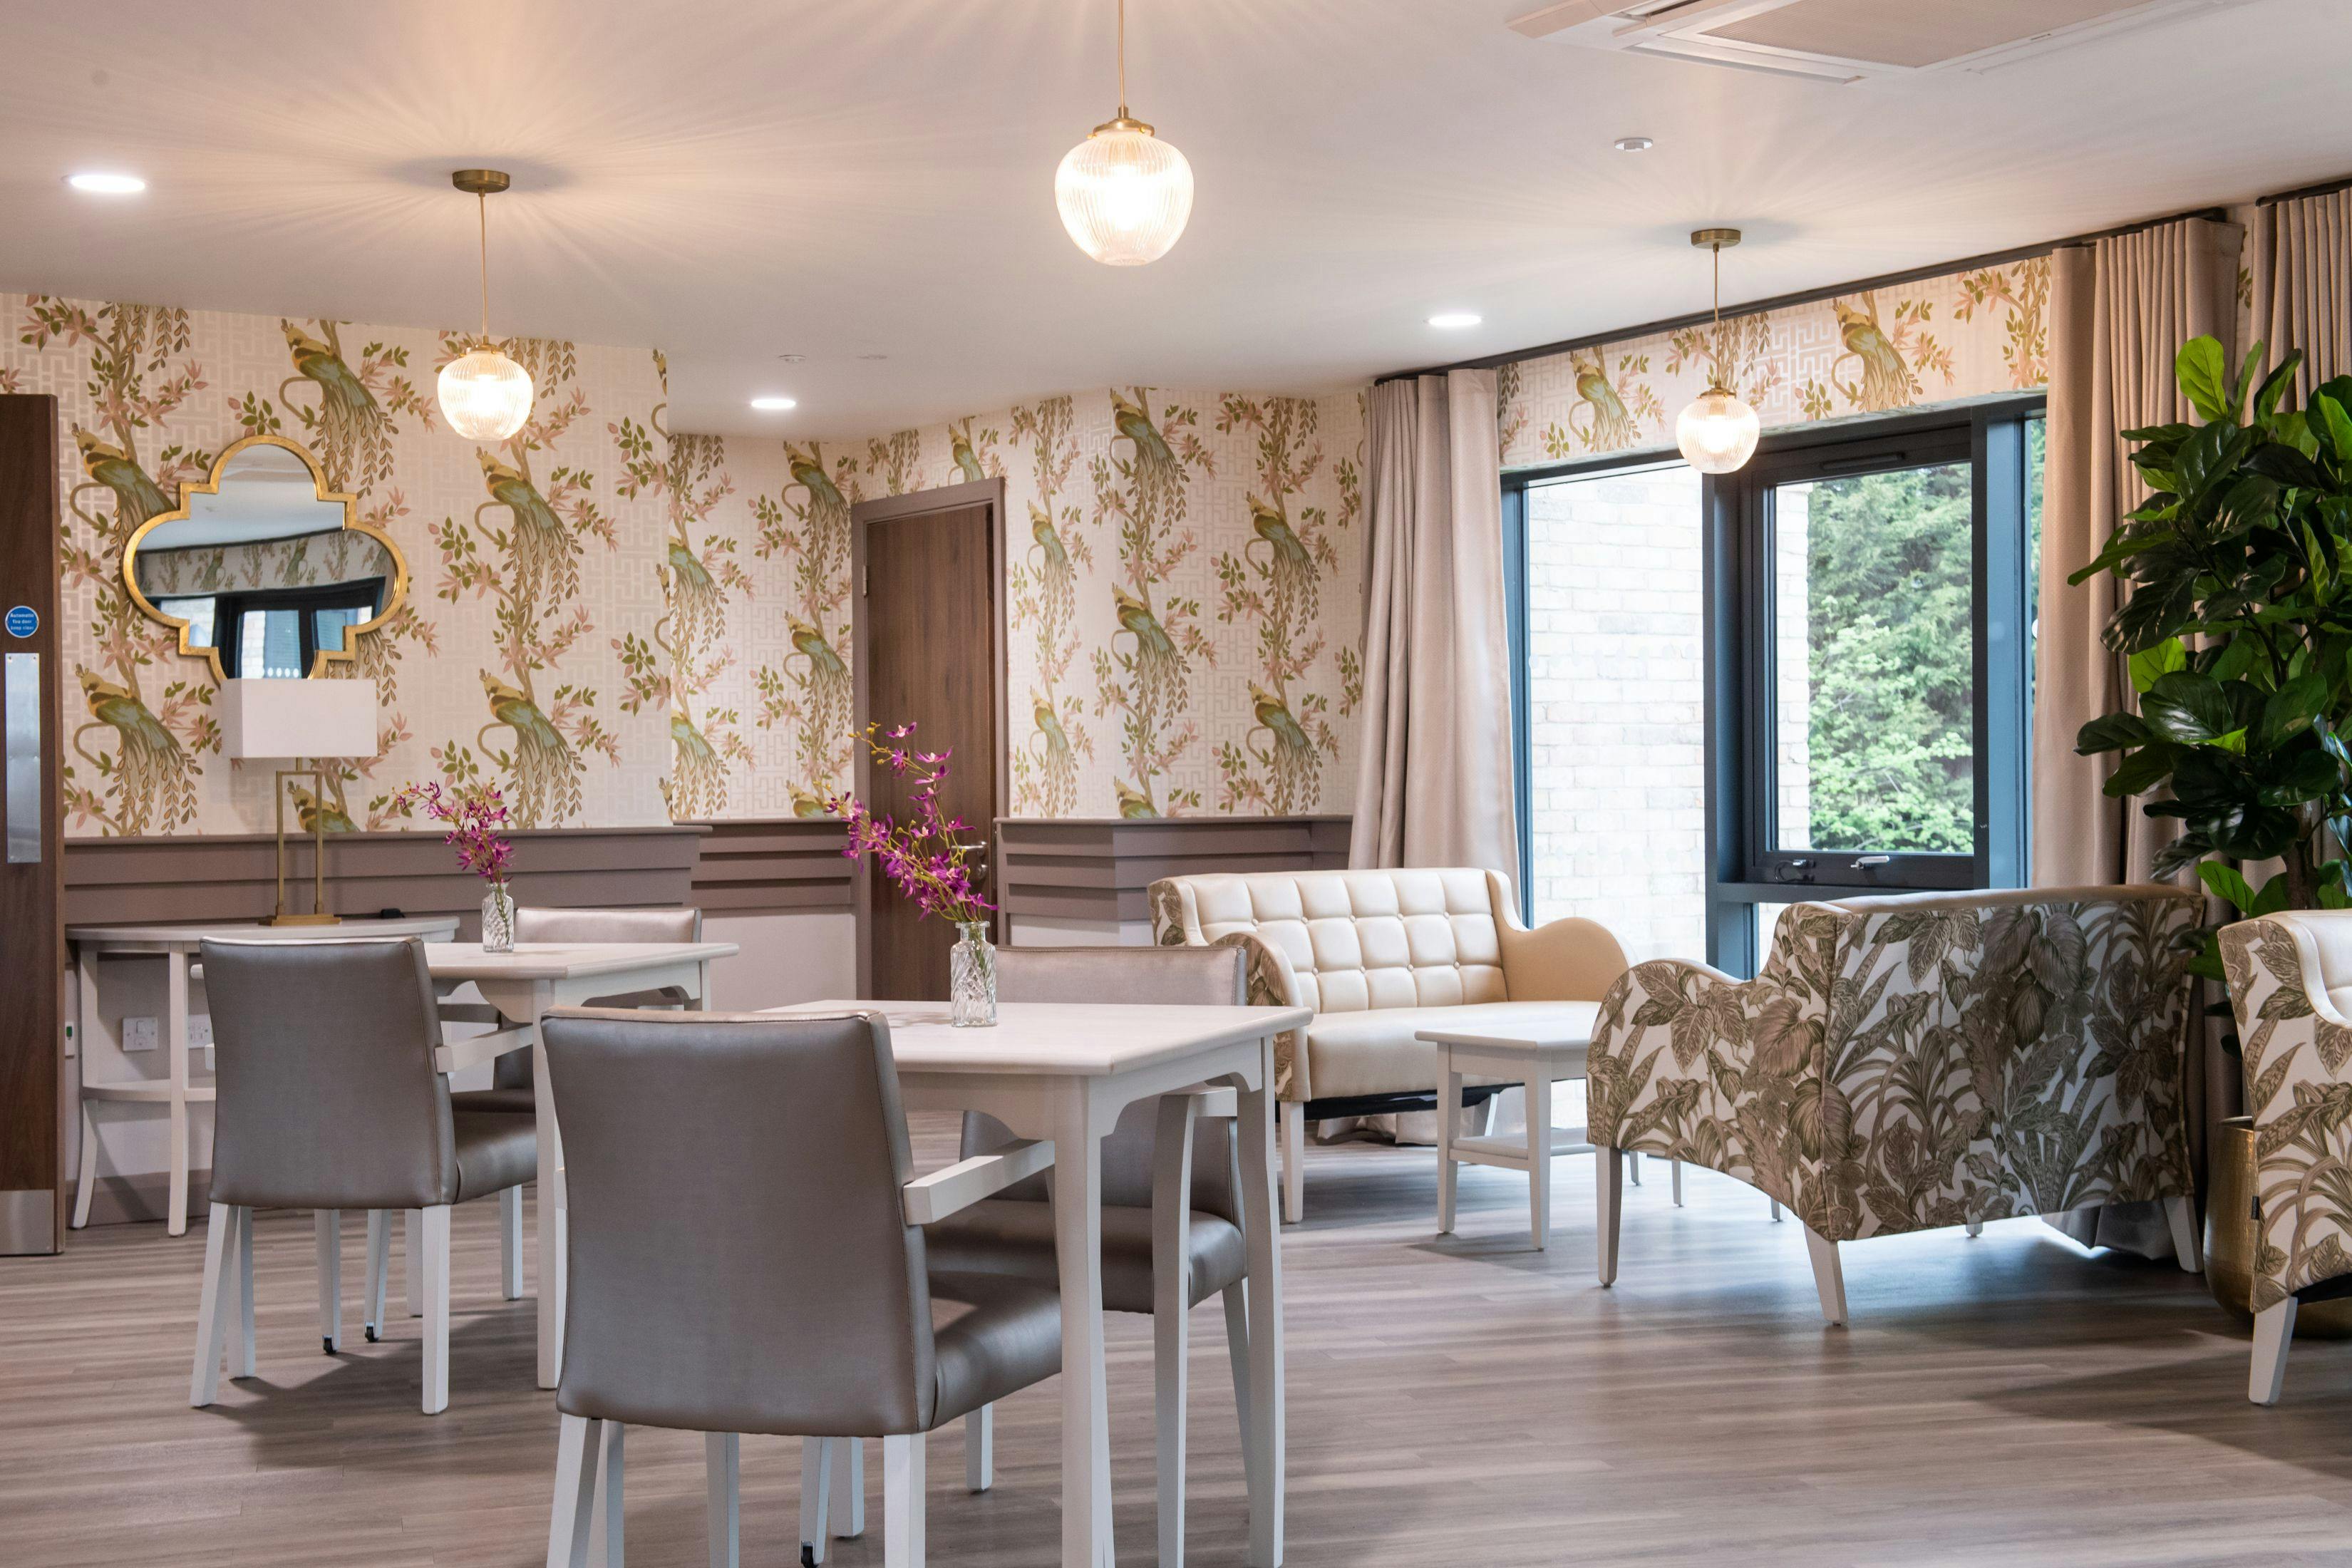 New Care - Adel Manor care home 19